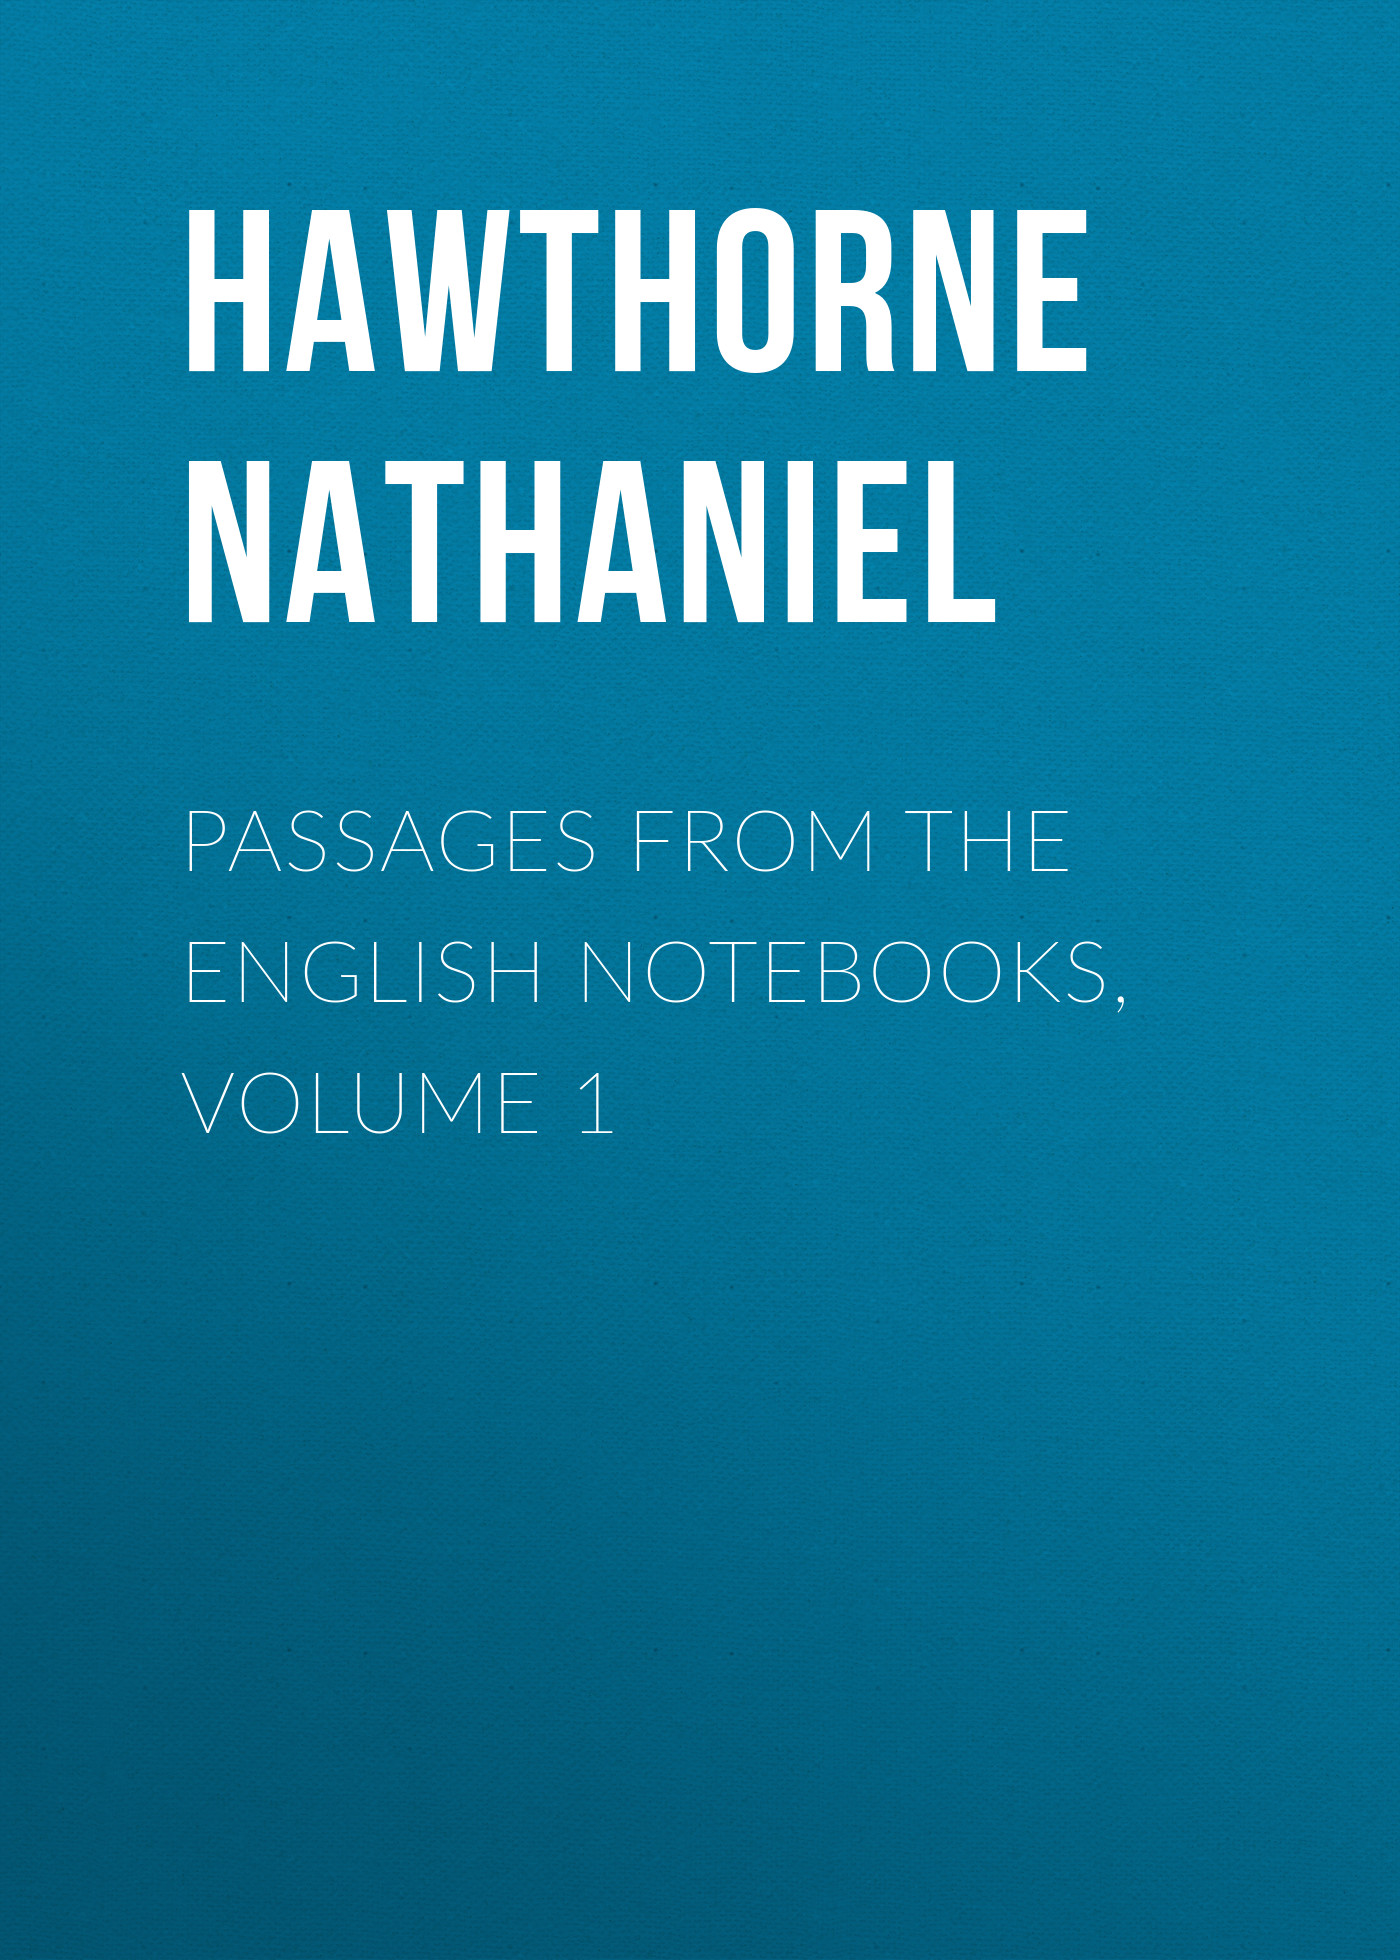 Passages from the English Notebooks, Volume 1